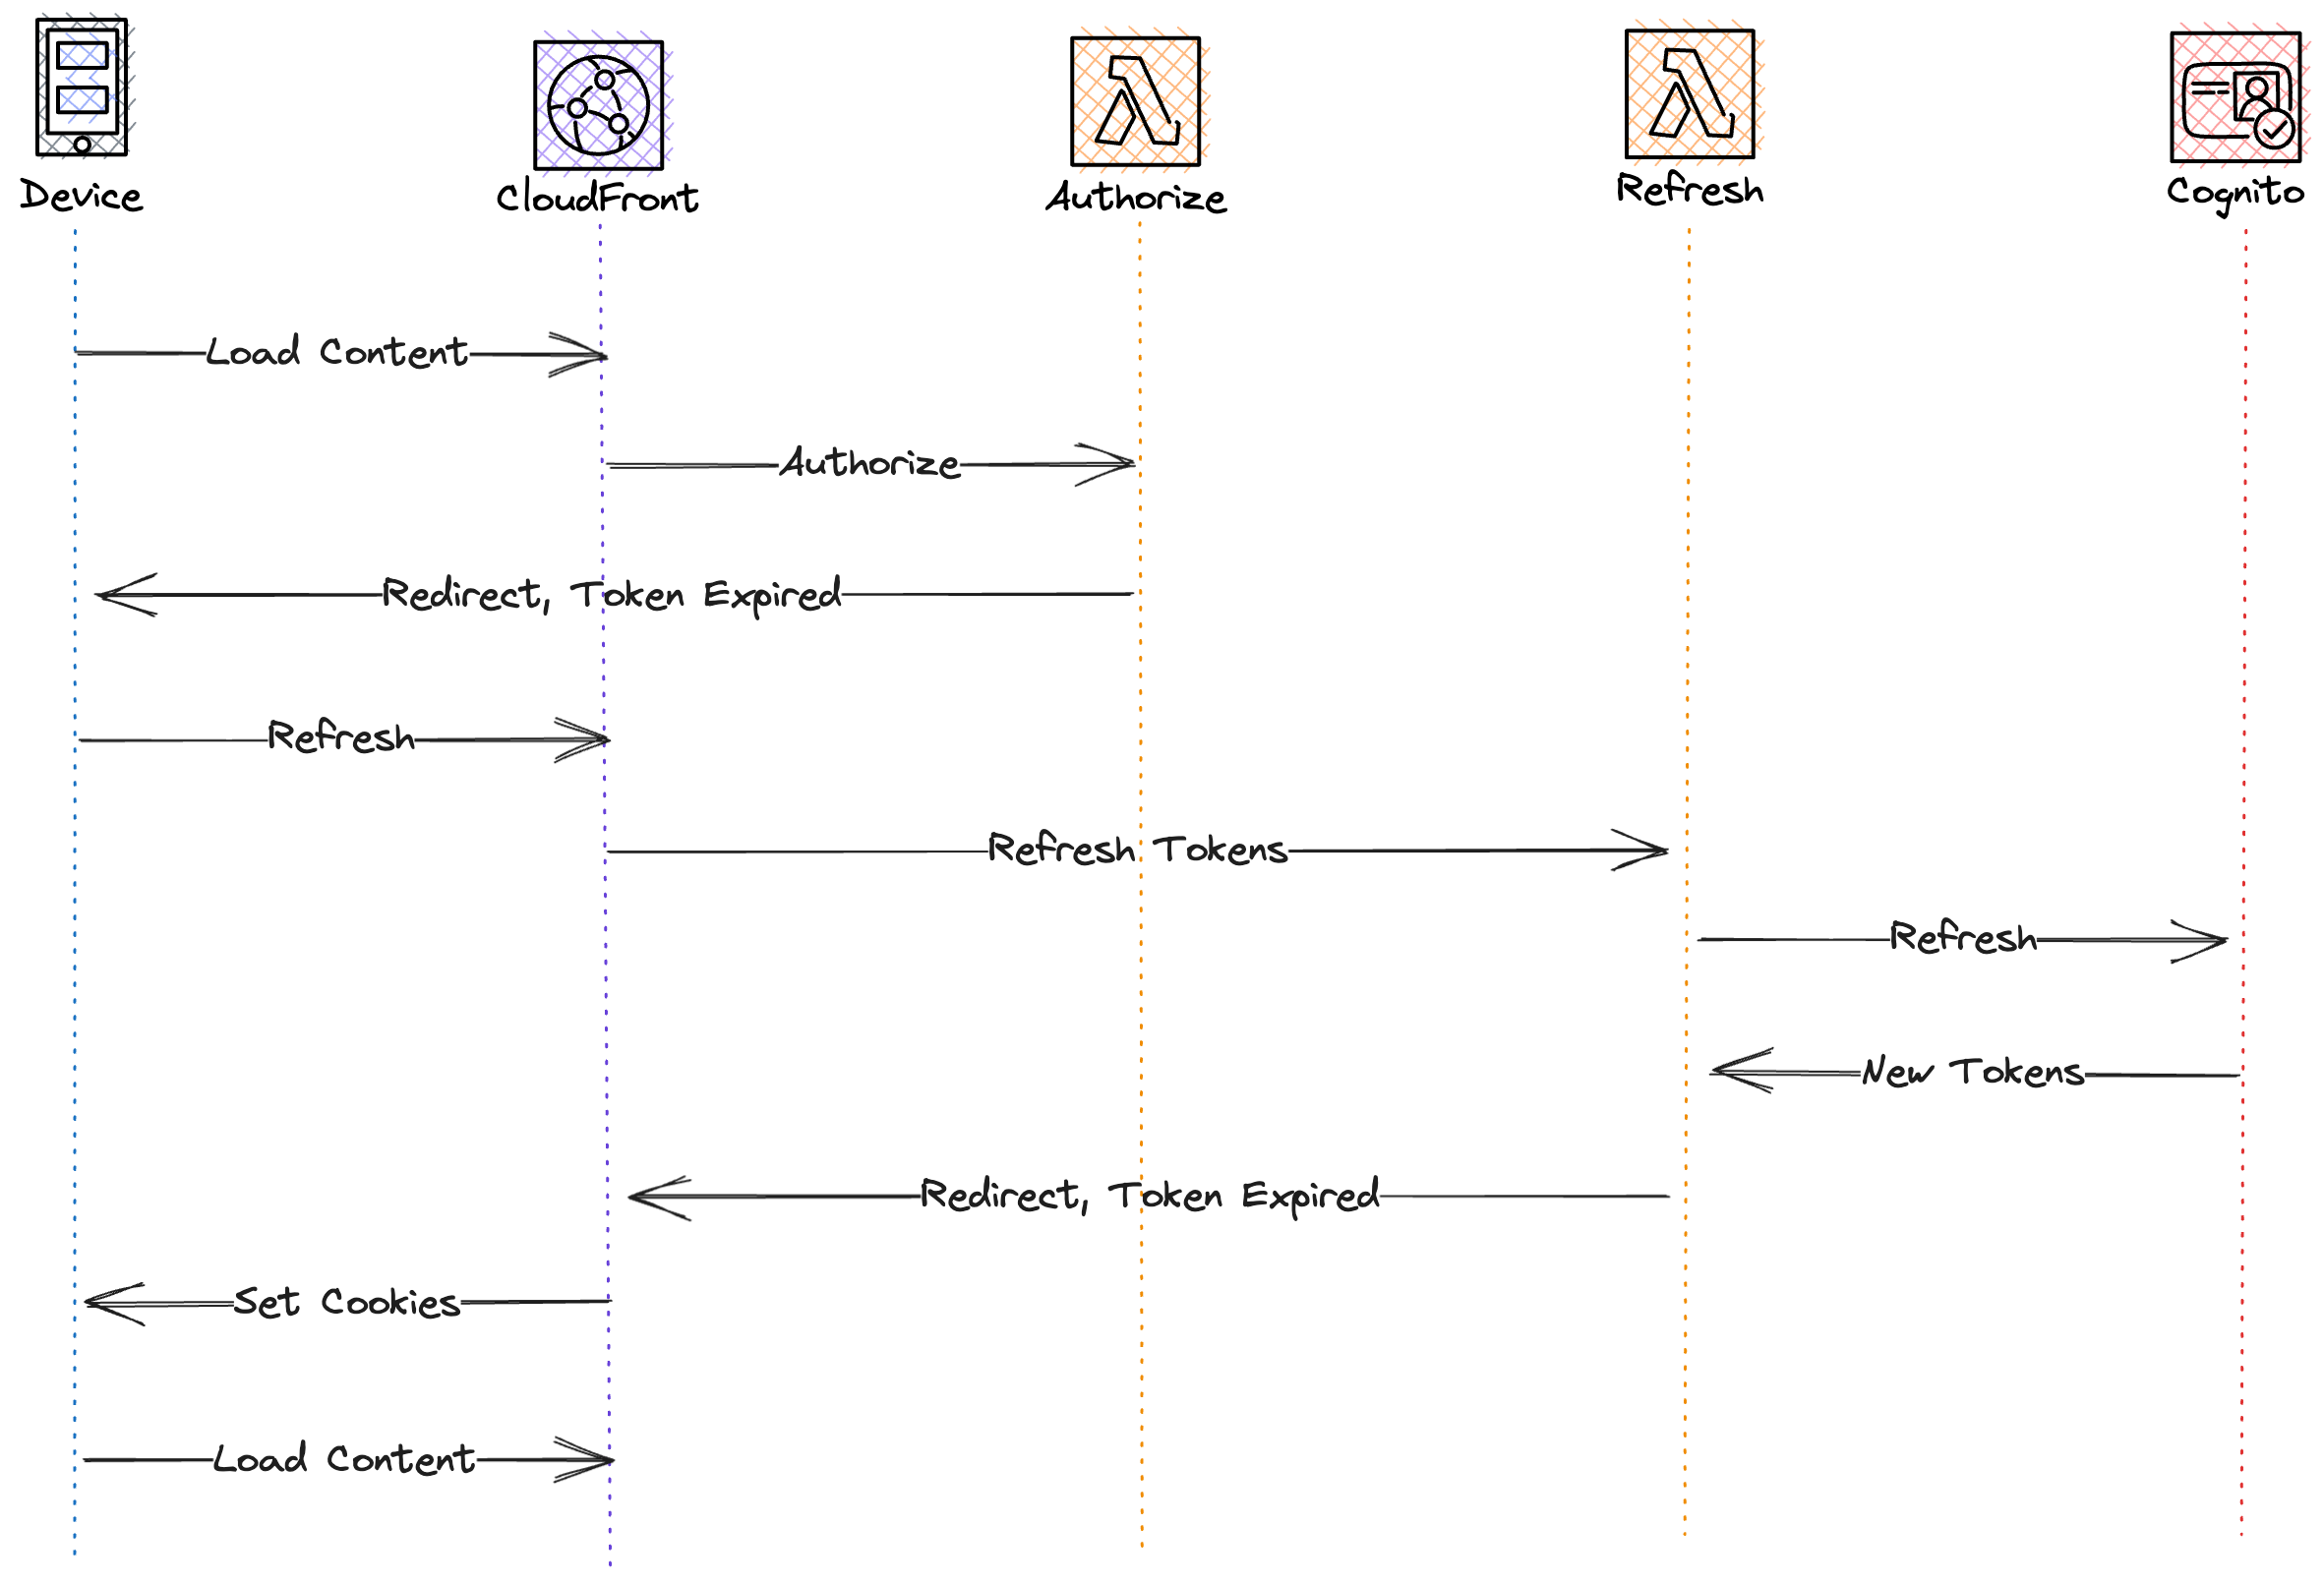 Image showing the refresh tokens flow.